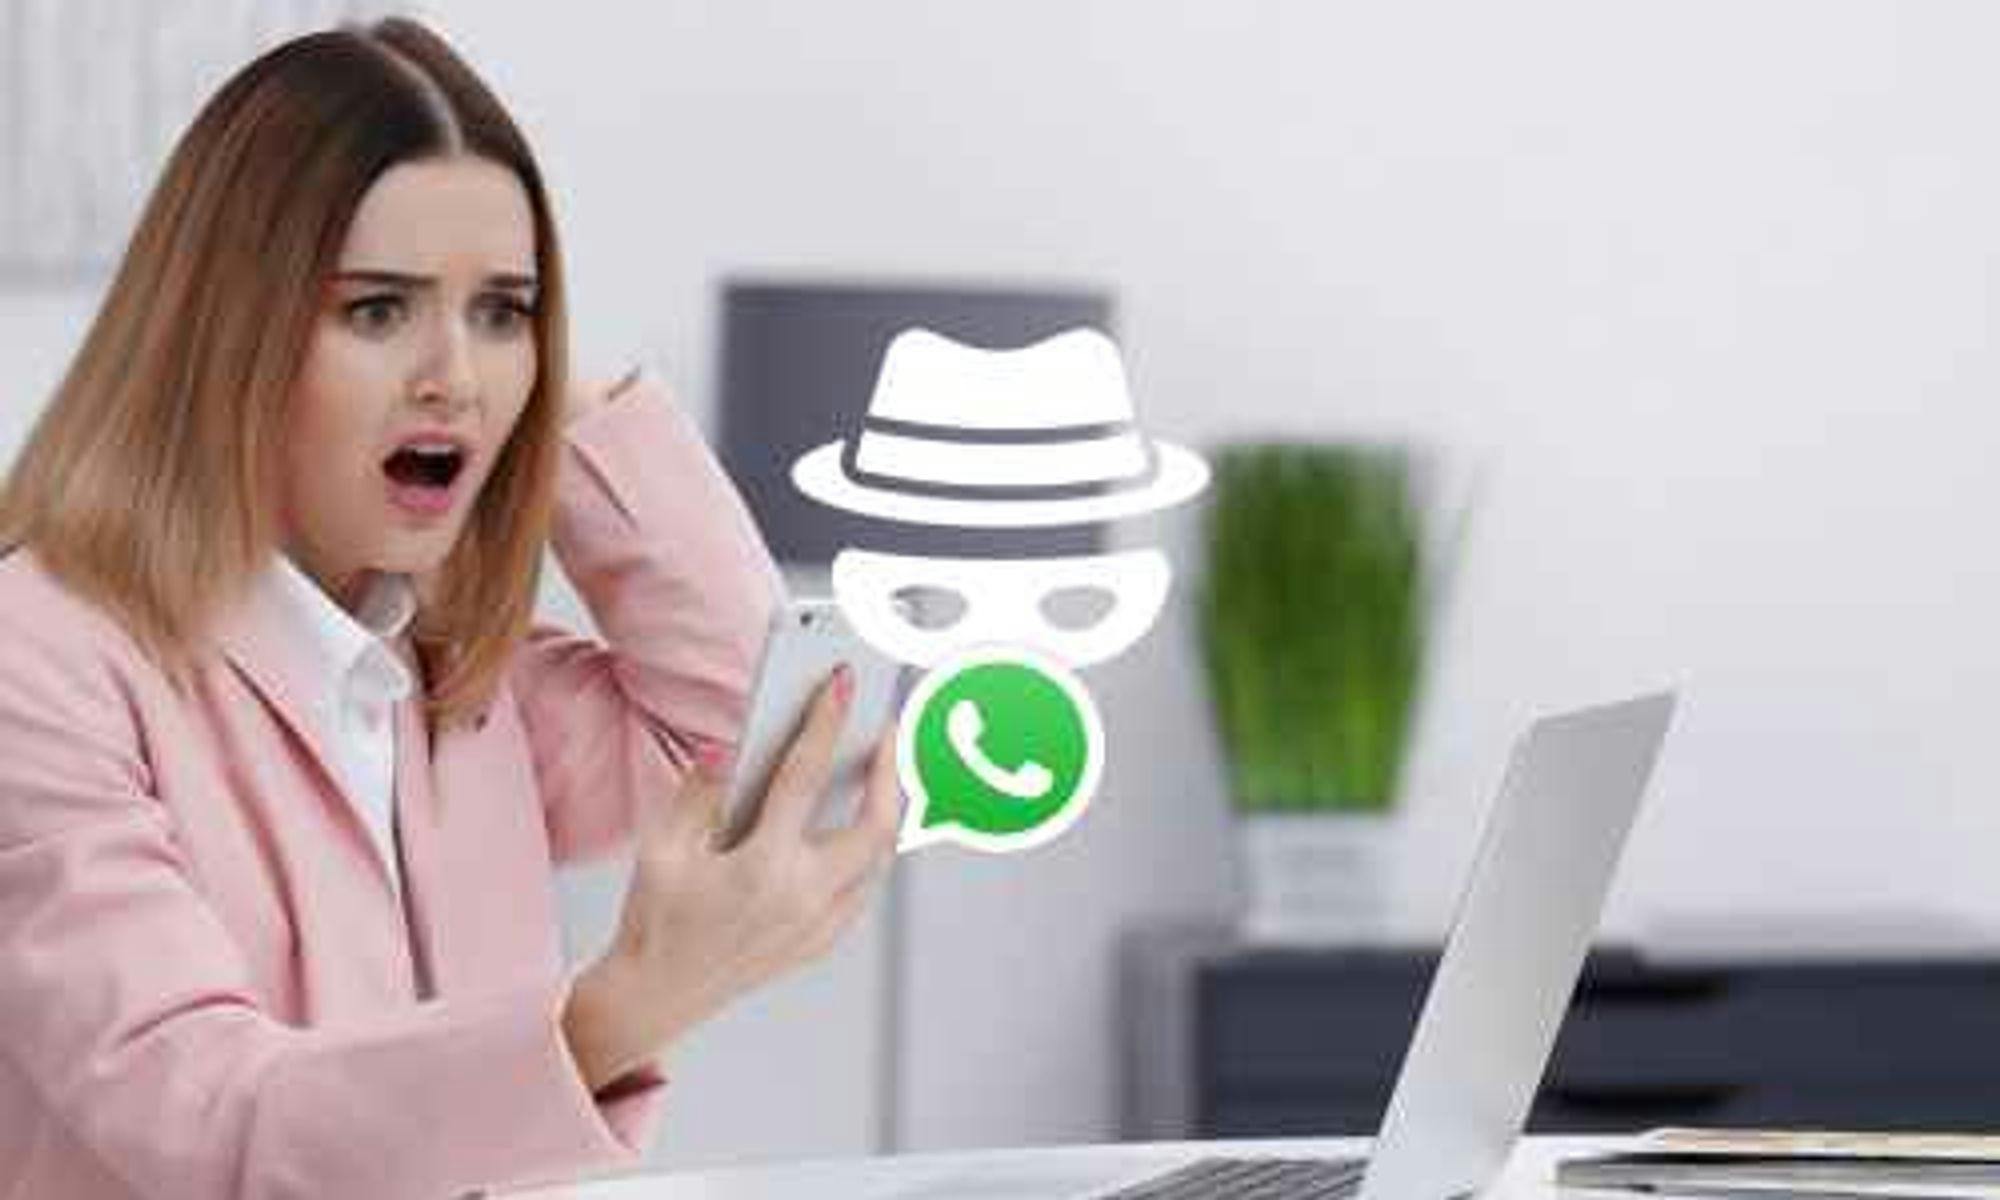 WhatsApp Hacked? How To Tell & What To Do Next